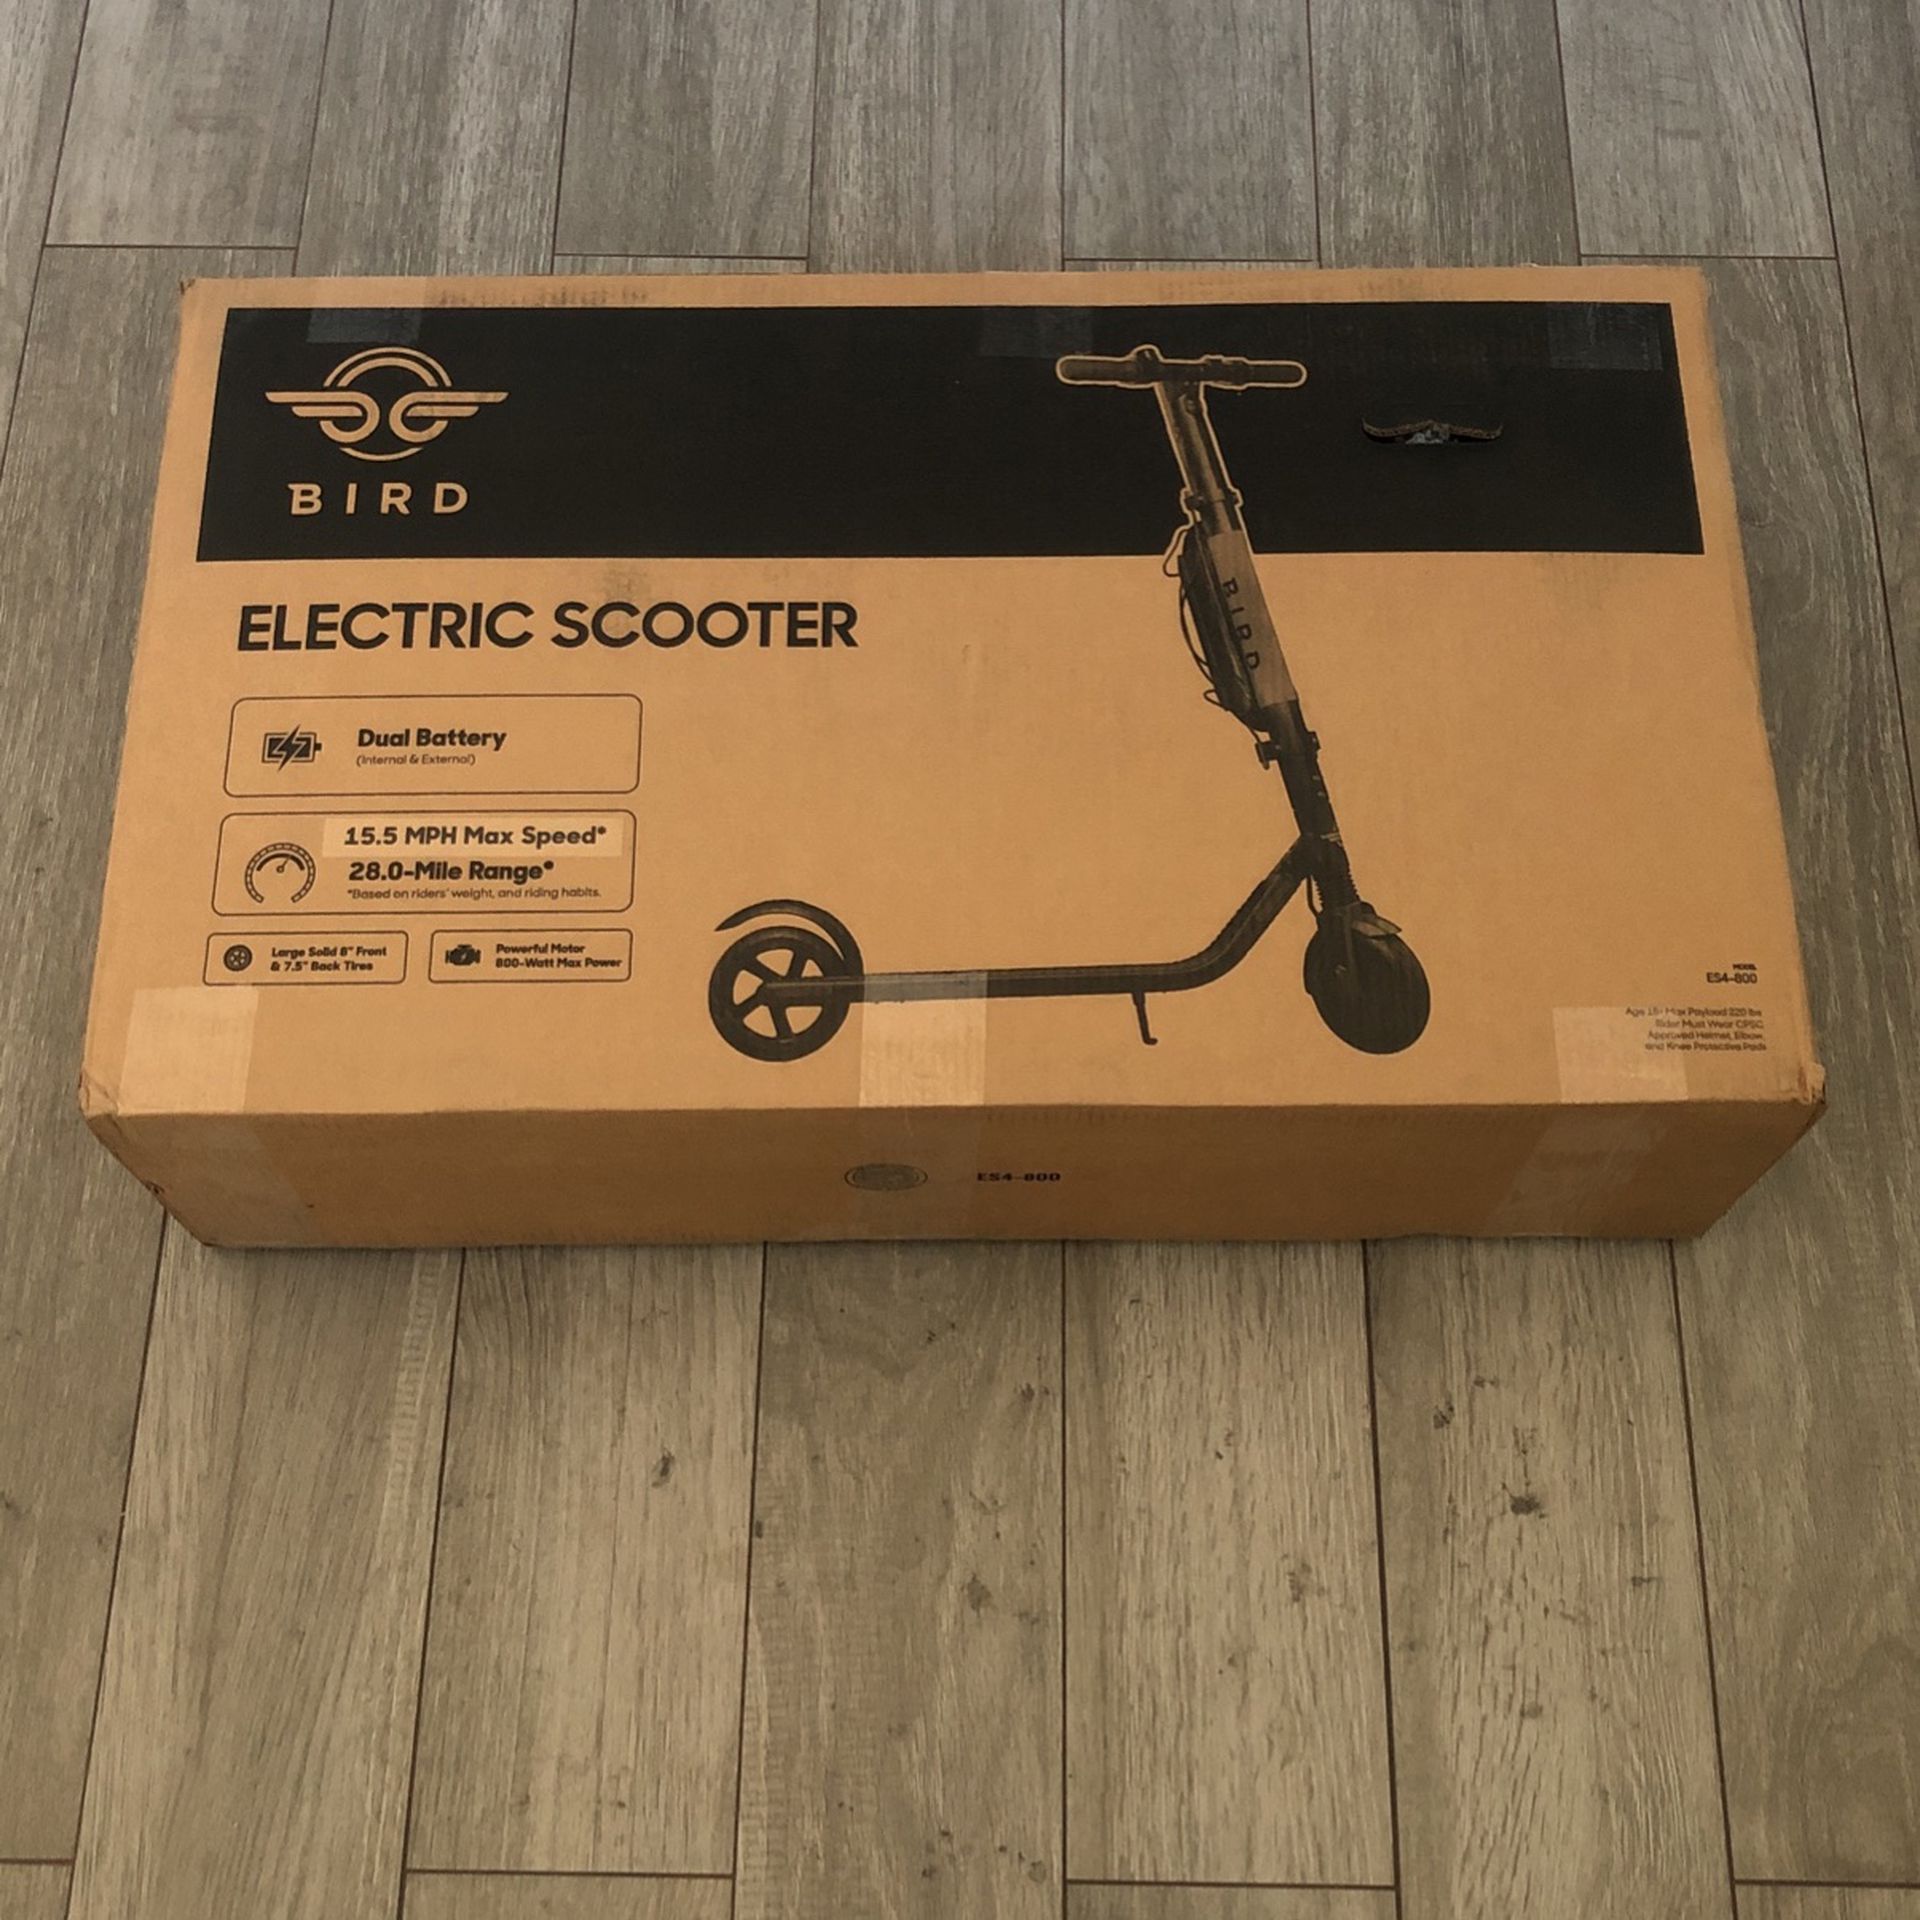 Bird Electric Scooter Sealed In-Box